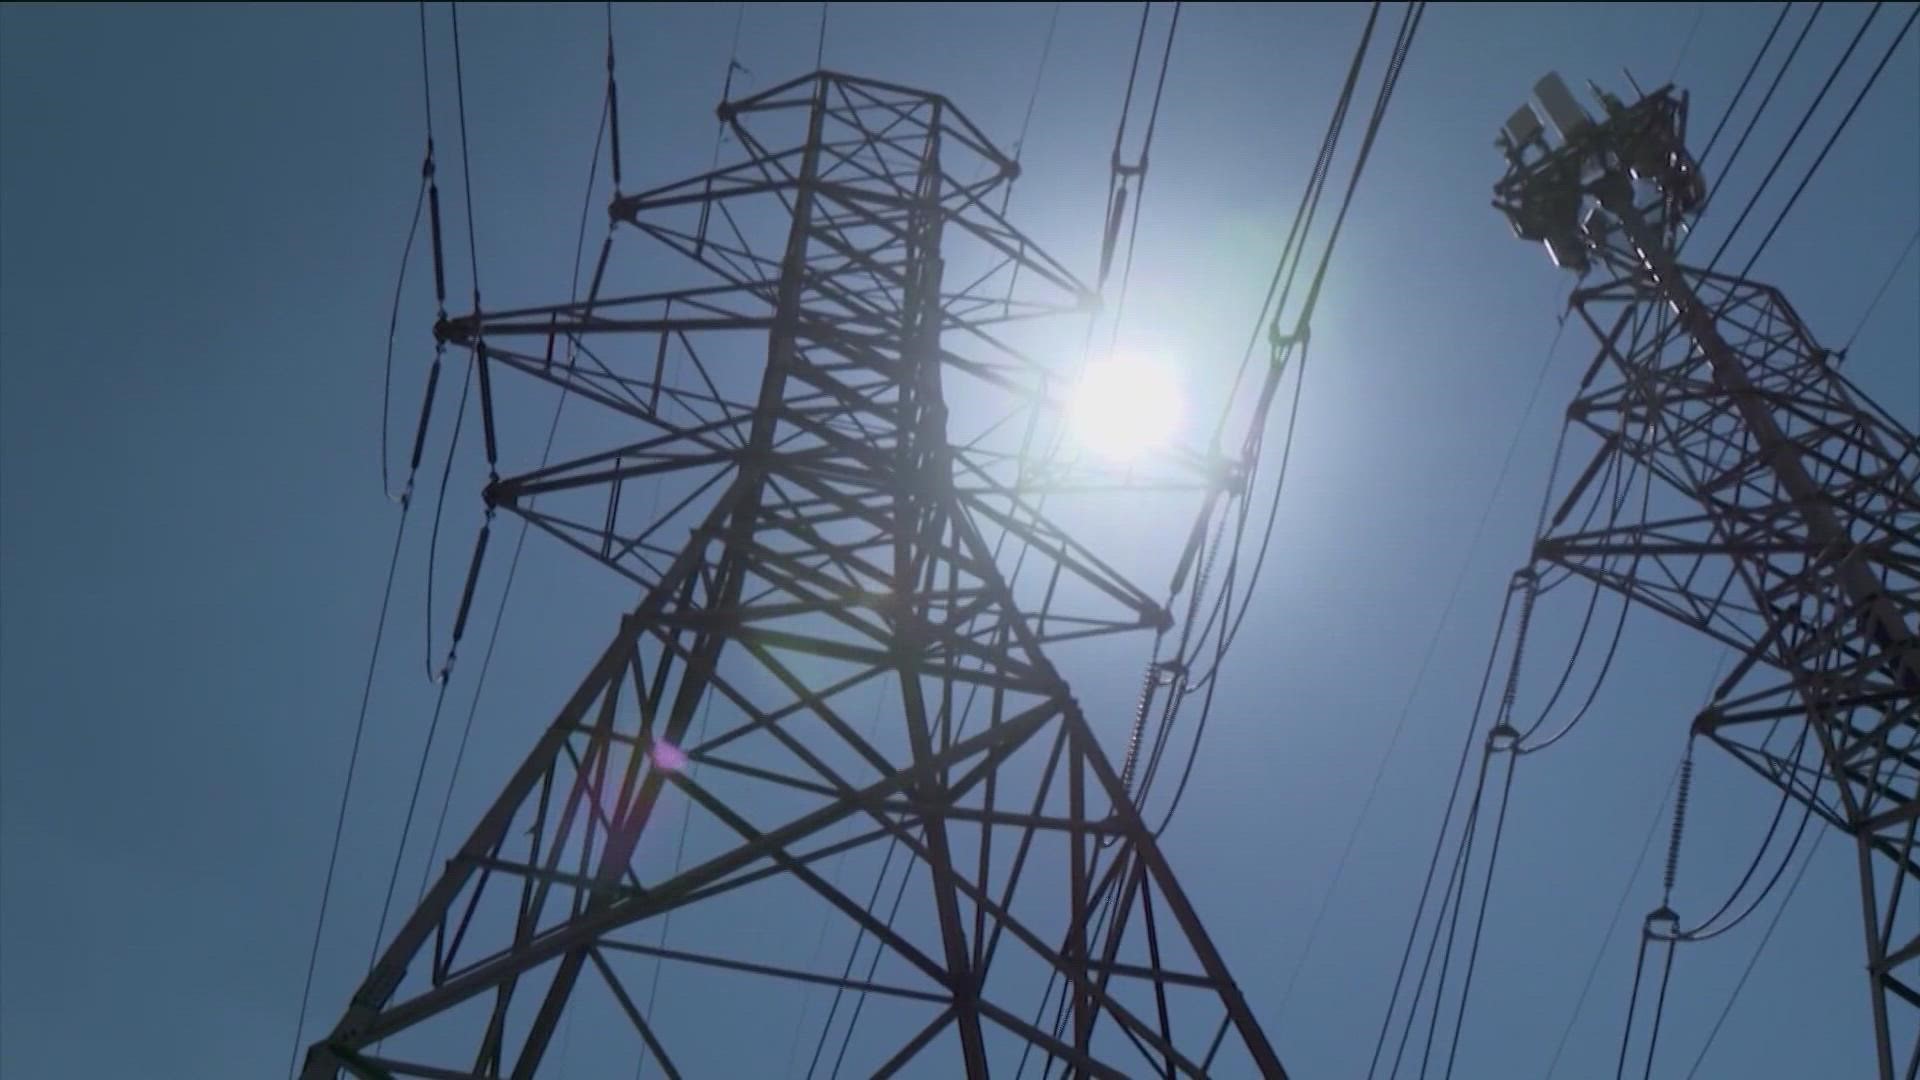 As temperatures soar, so can your power bill. KVUE's Matt Fernandez shows us ways to reduce our electricity use.